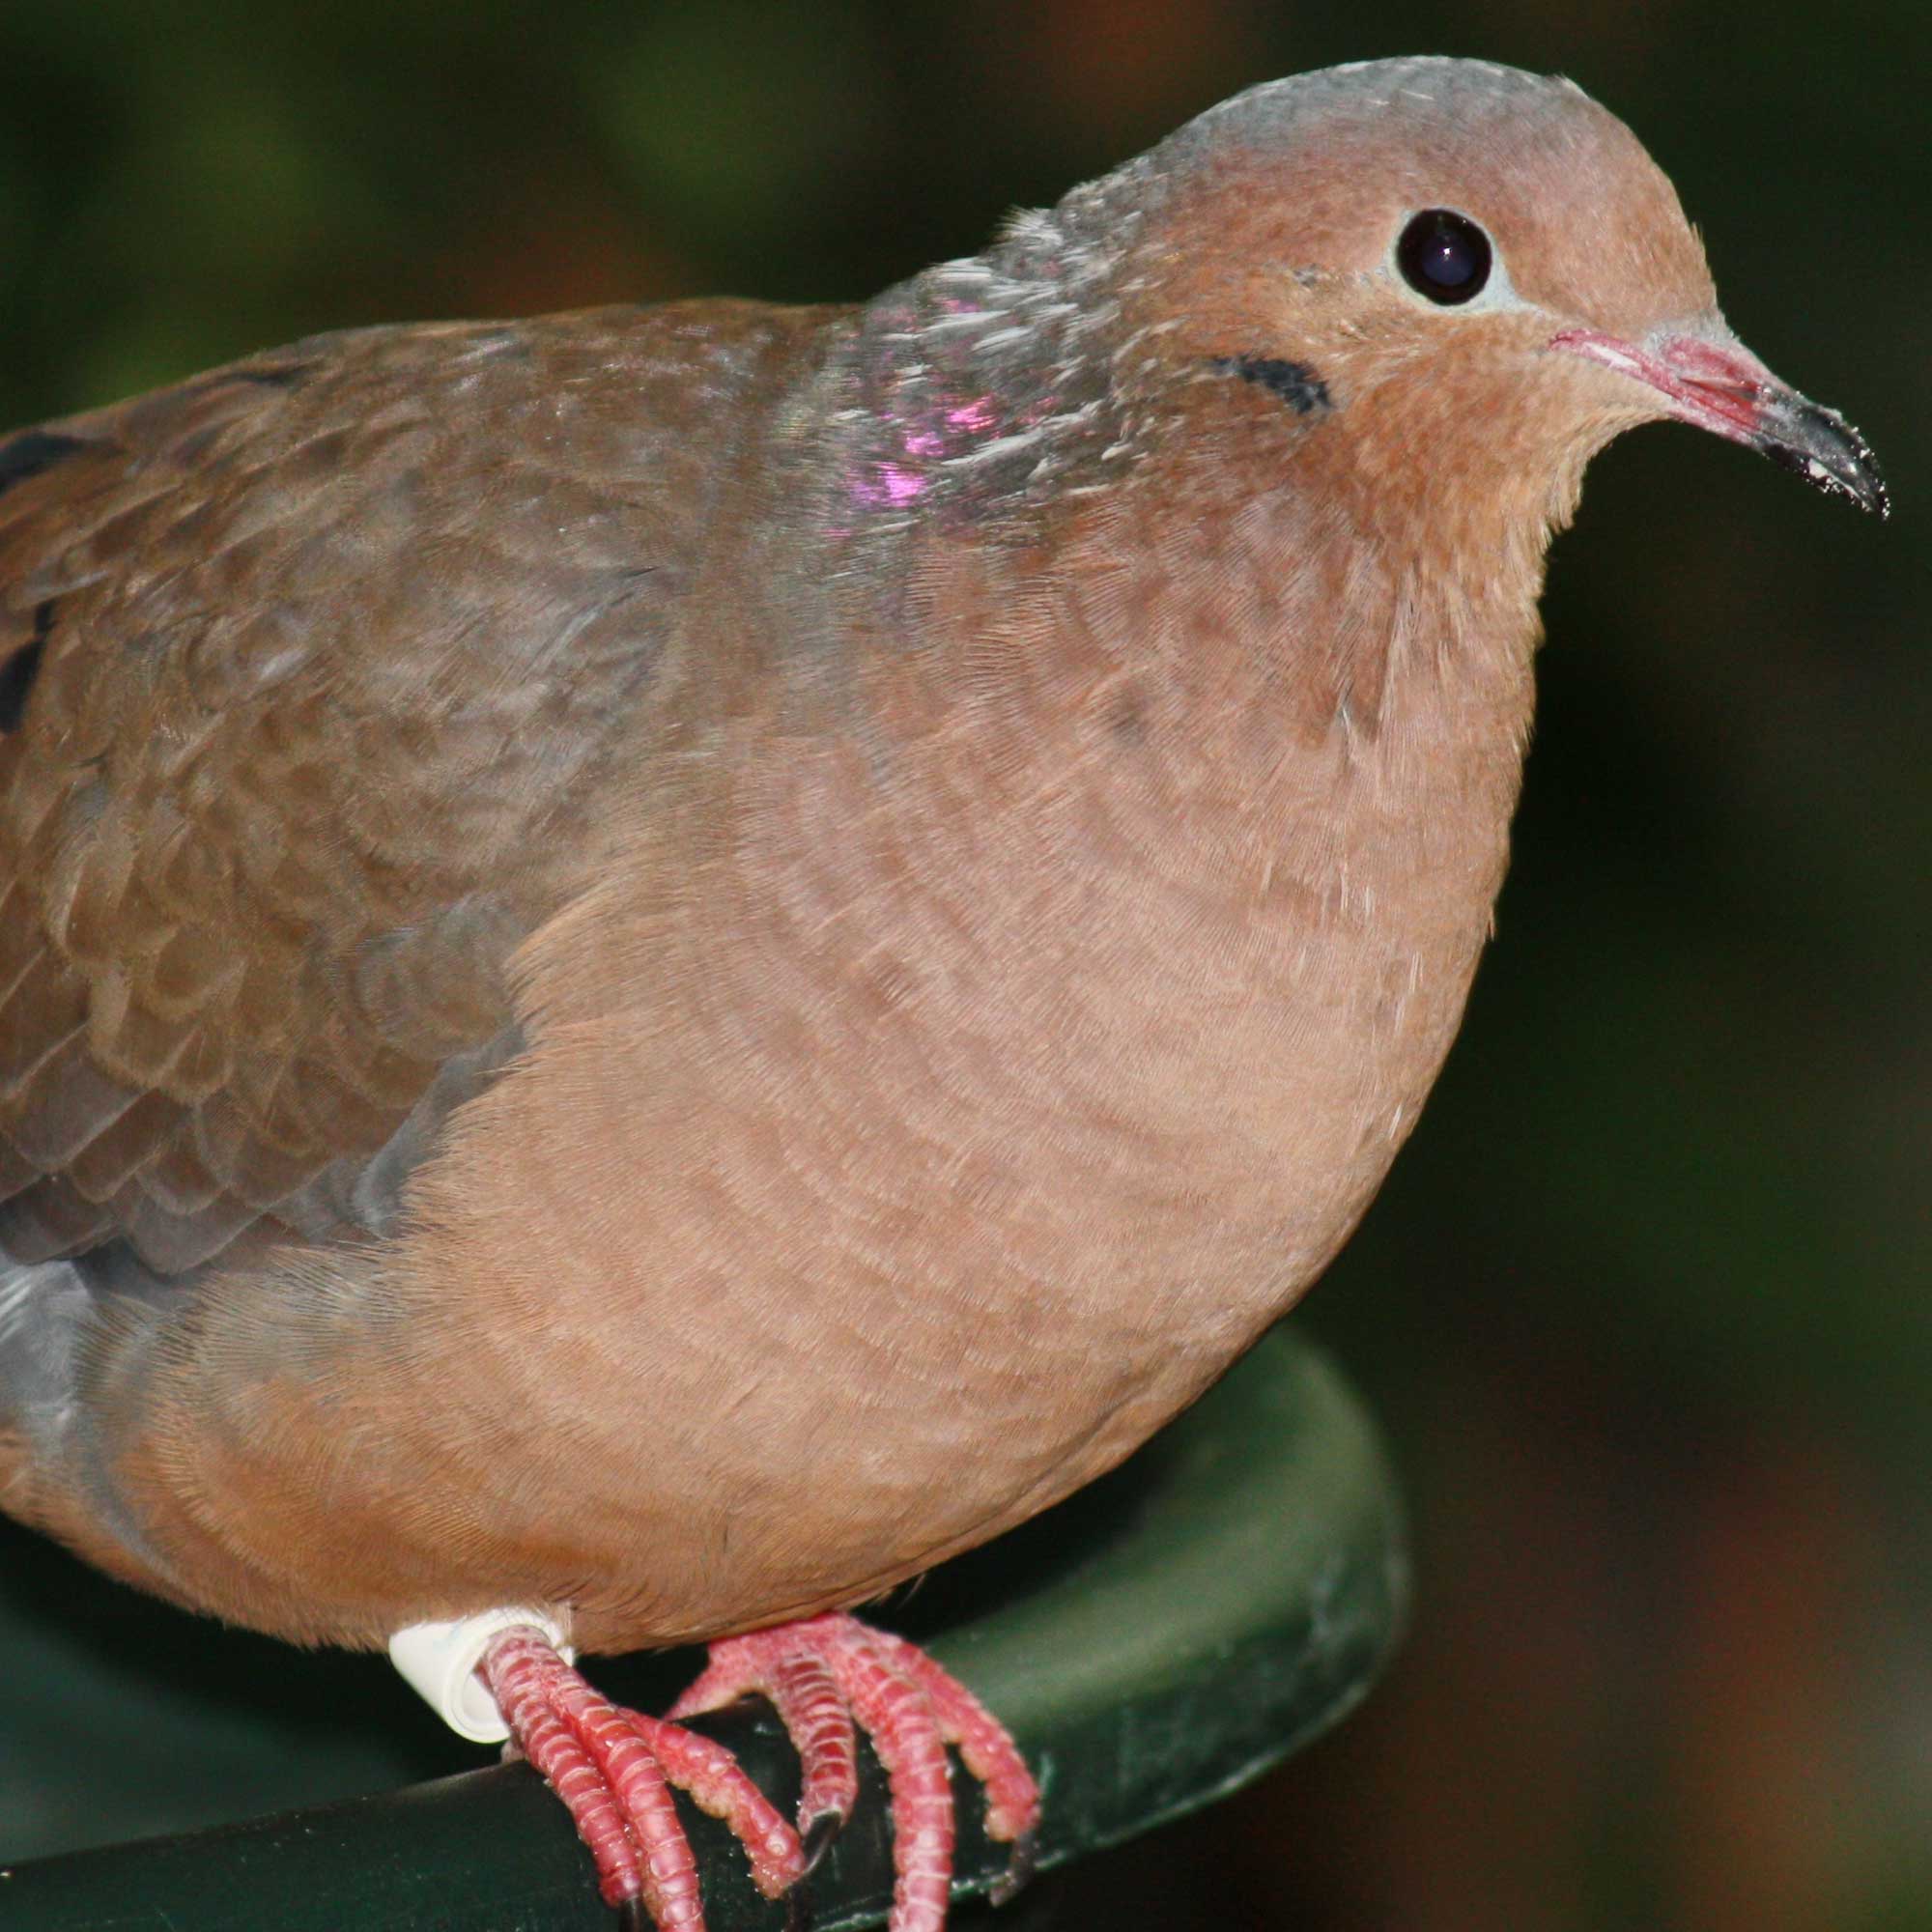 A Socorro dove perched on the rim of a plastic container. The dove is a light brown, pigeon-like bird with a black eye, reddish orange feet, and a iridescent patch at the nape of its neck.